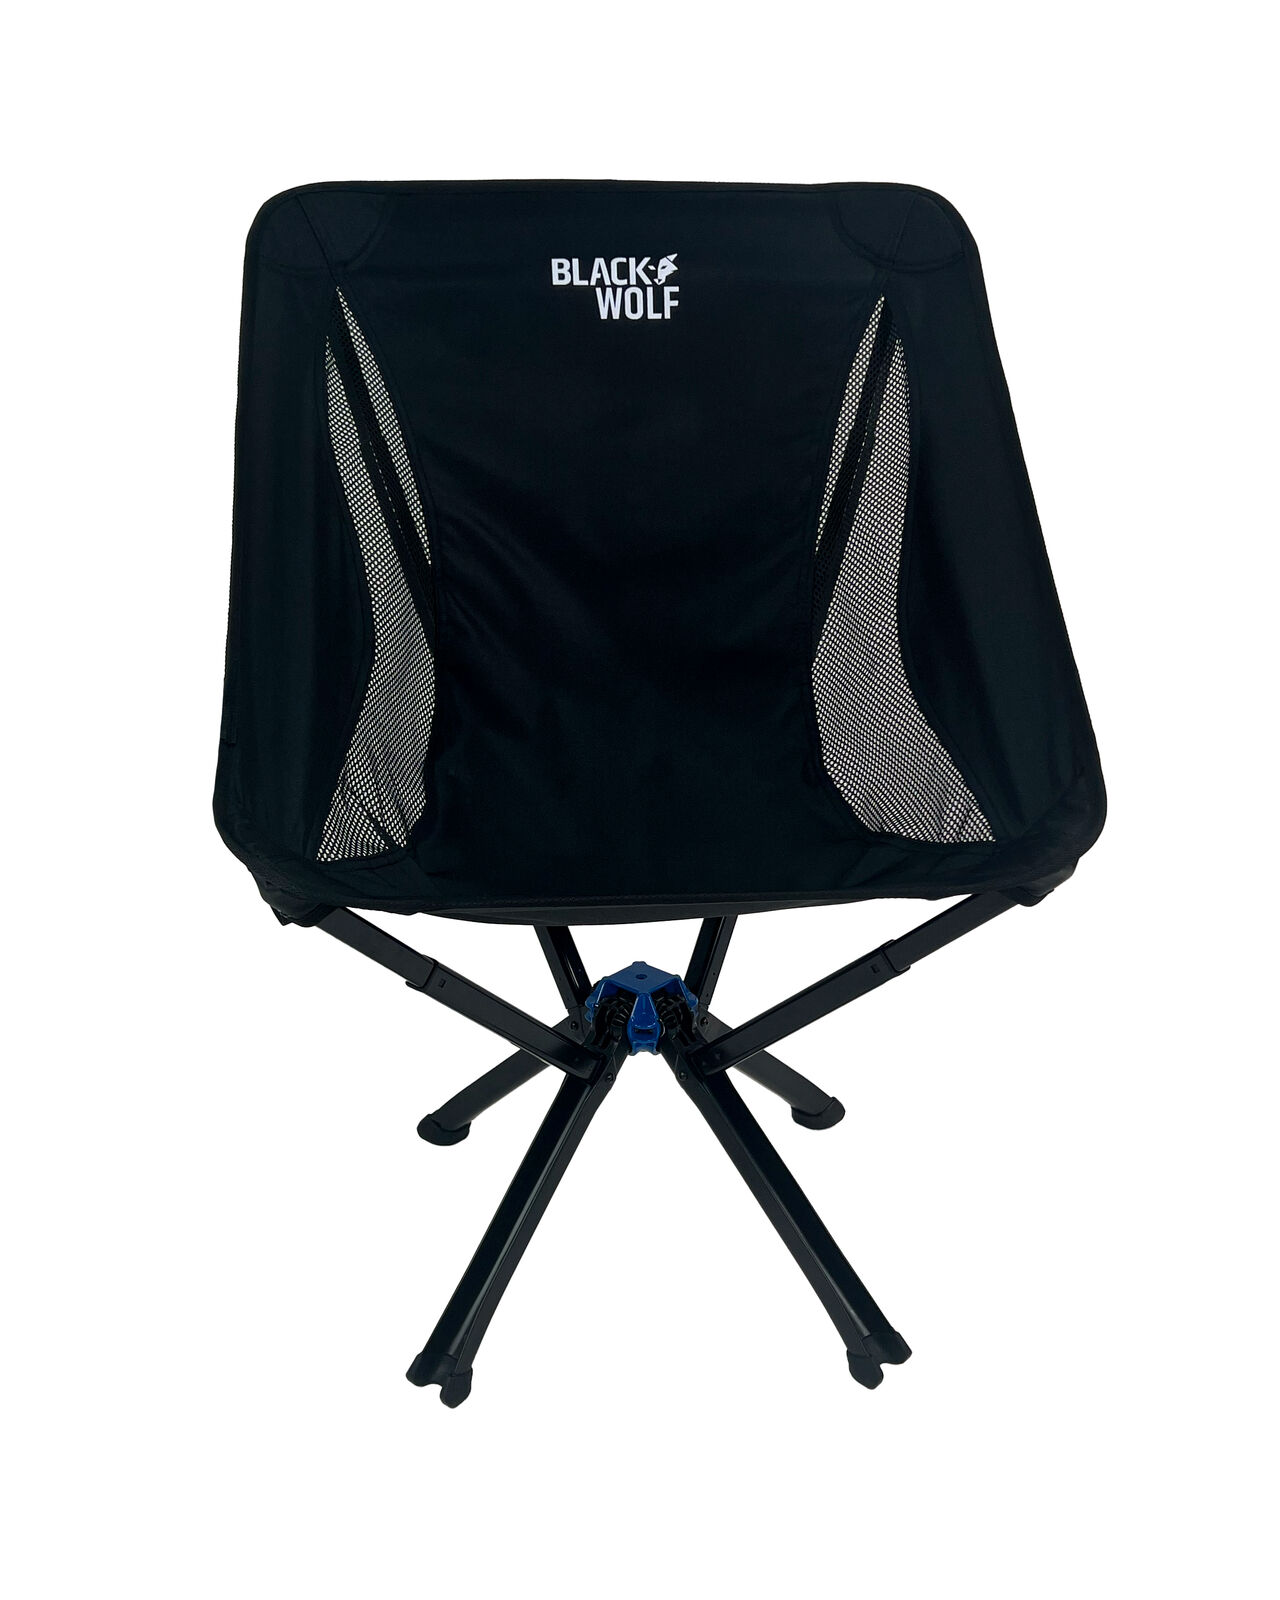 Blackwolf Quick Fold Camp Chair Small Compact (6)